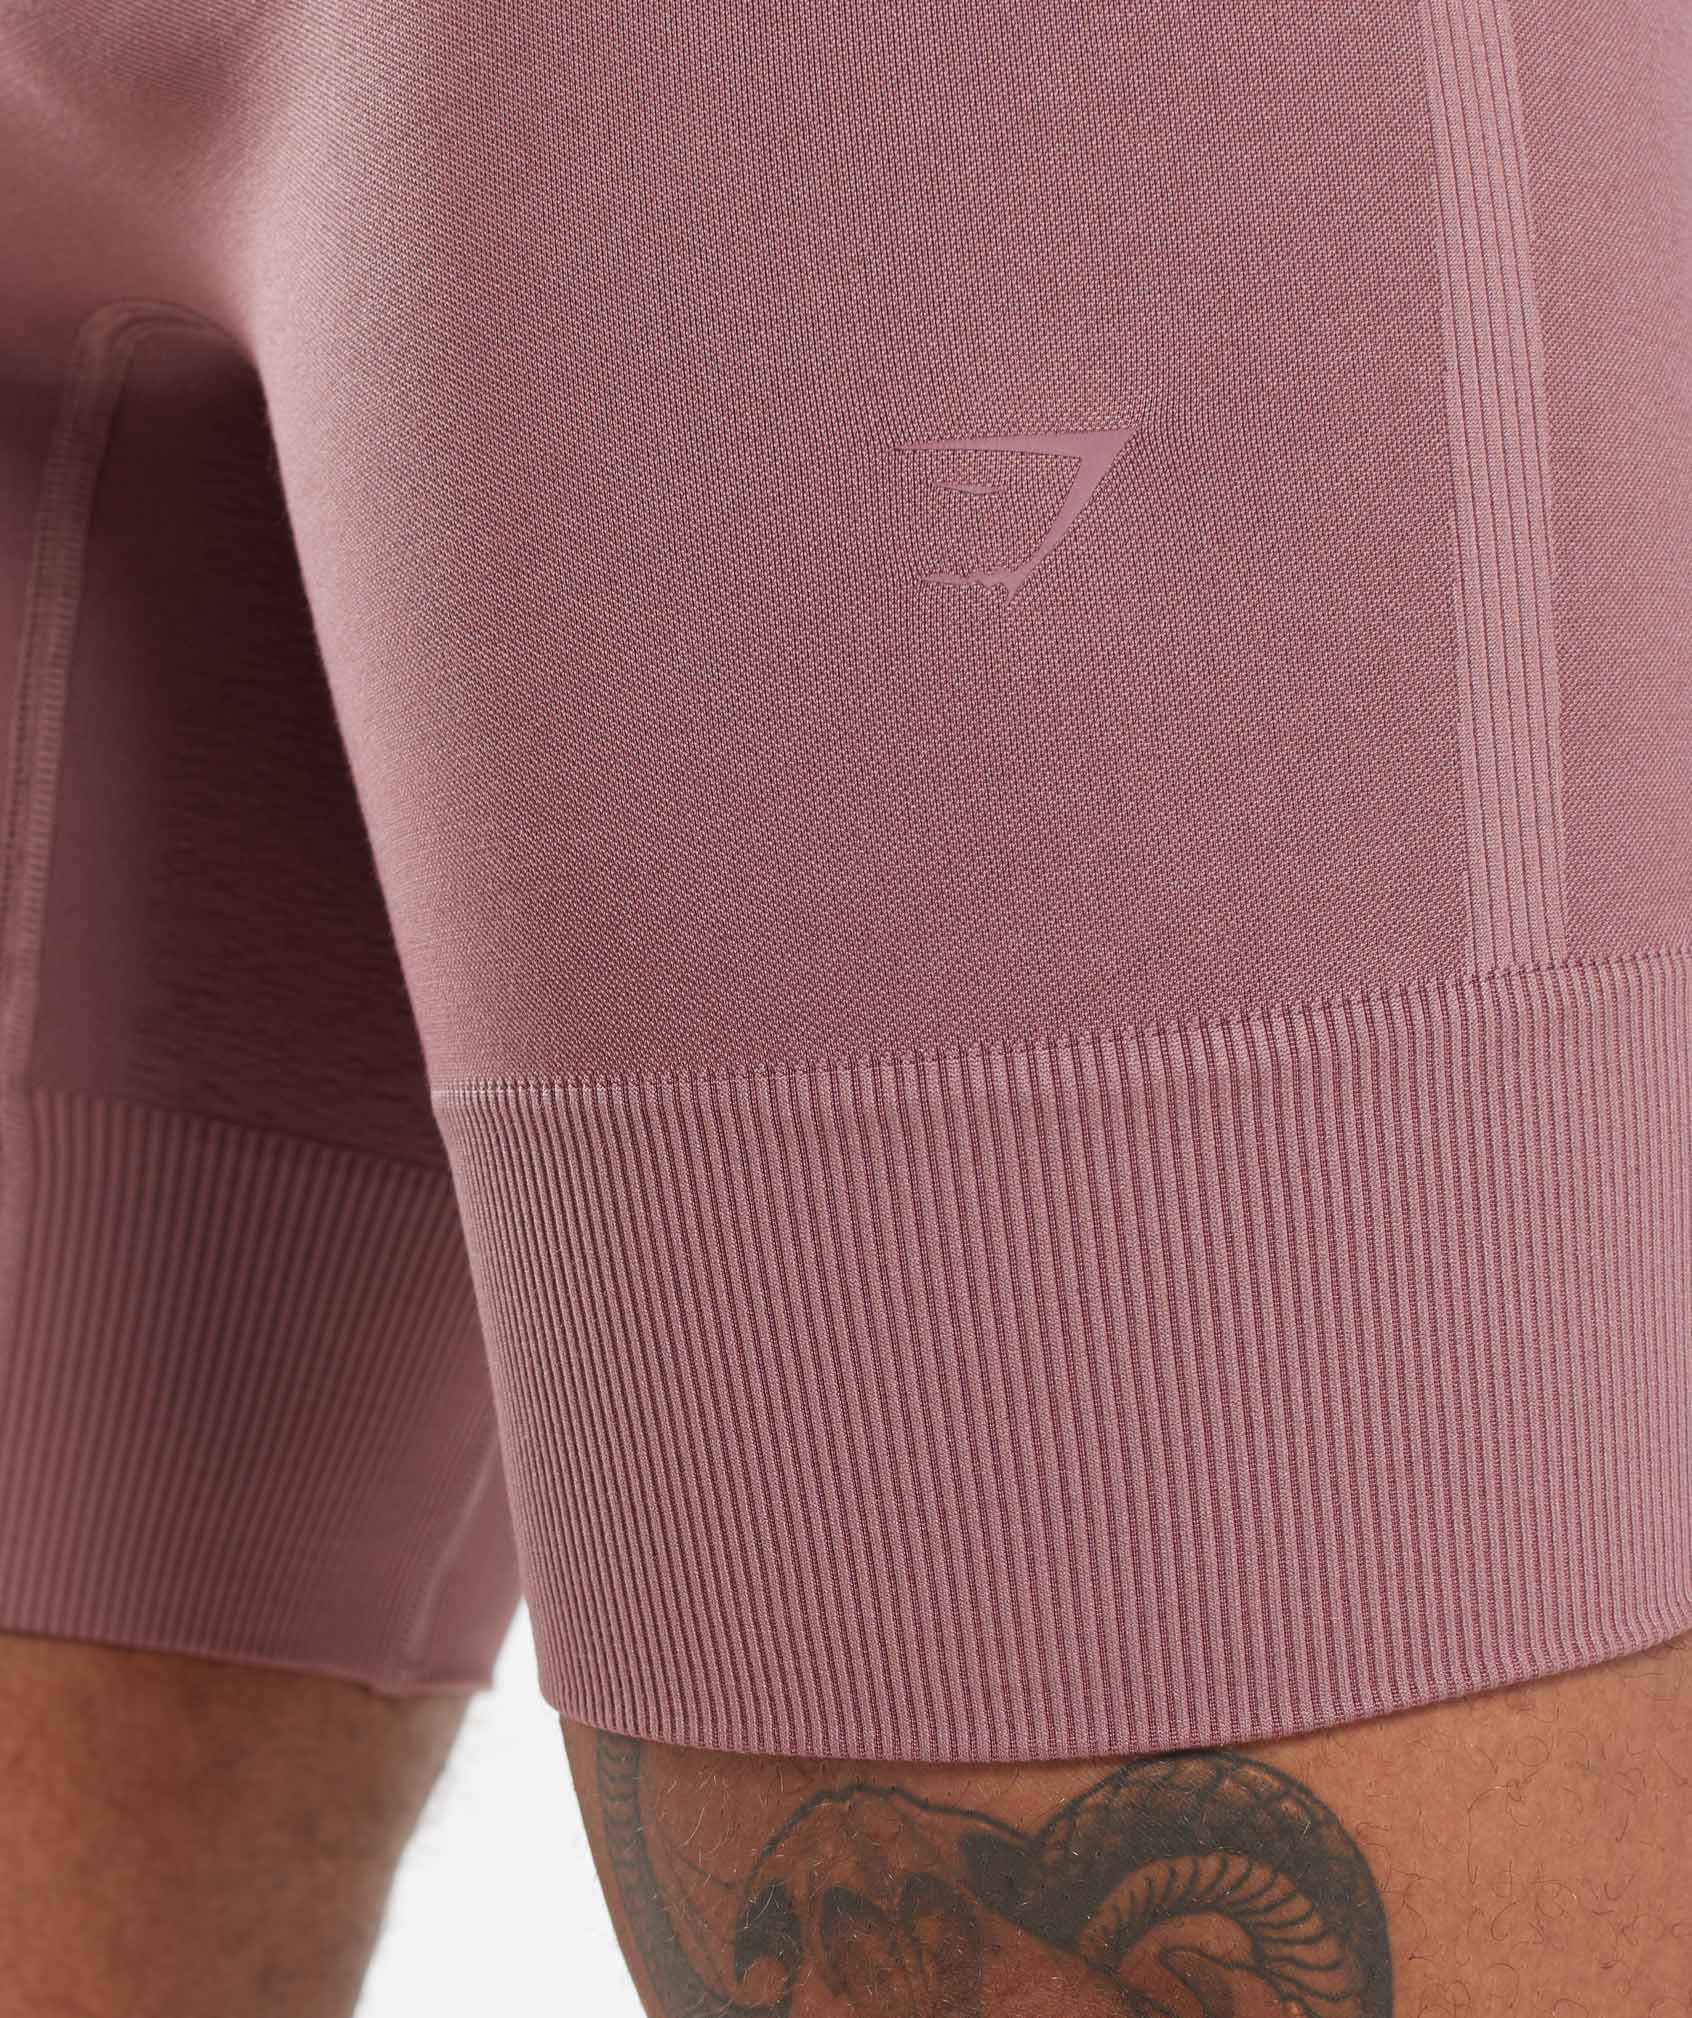 Running Seamless 7" Shorts in Dusty Maroon - view 6